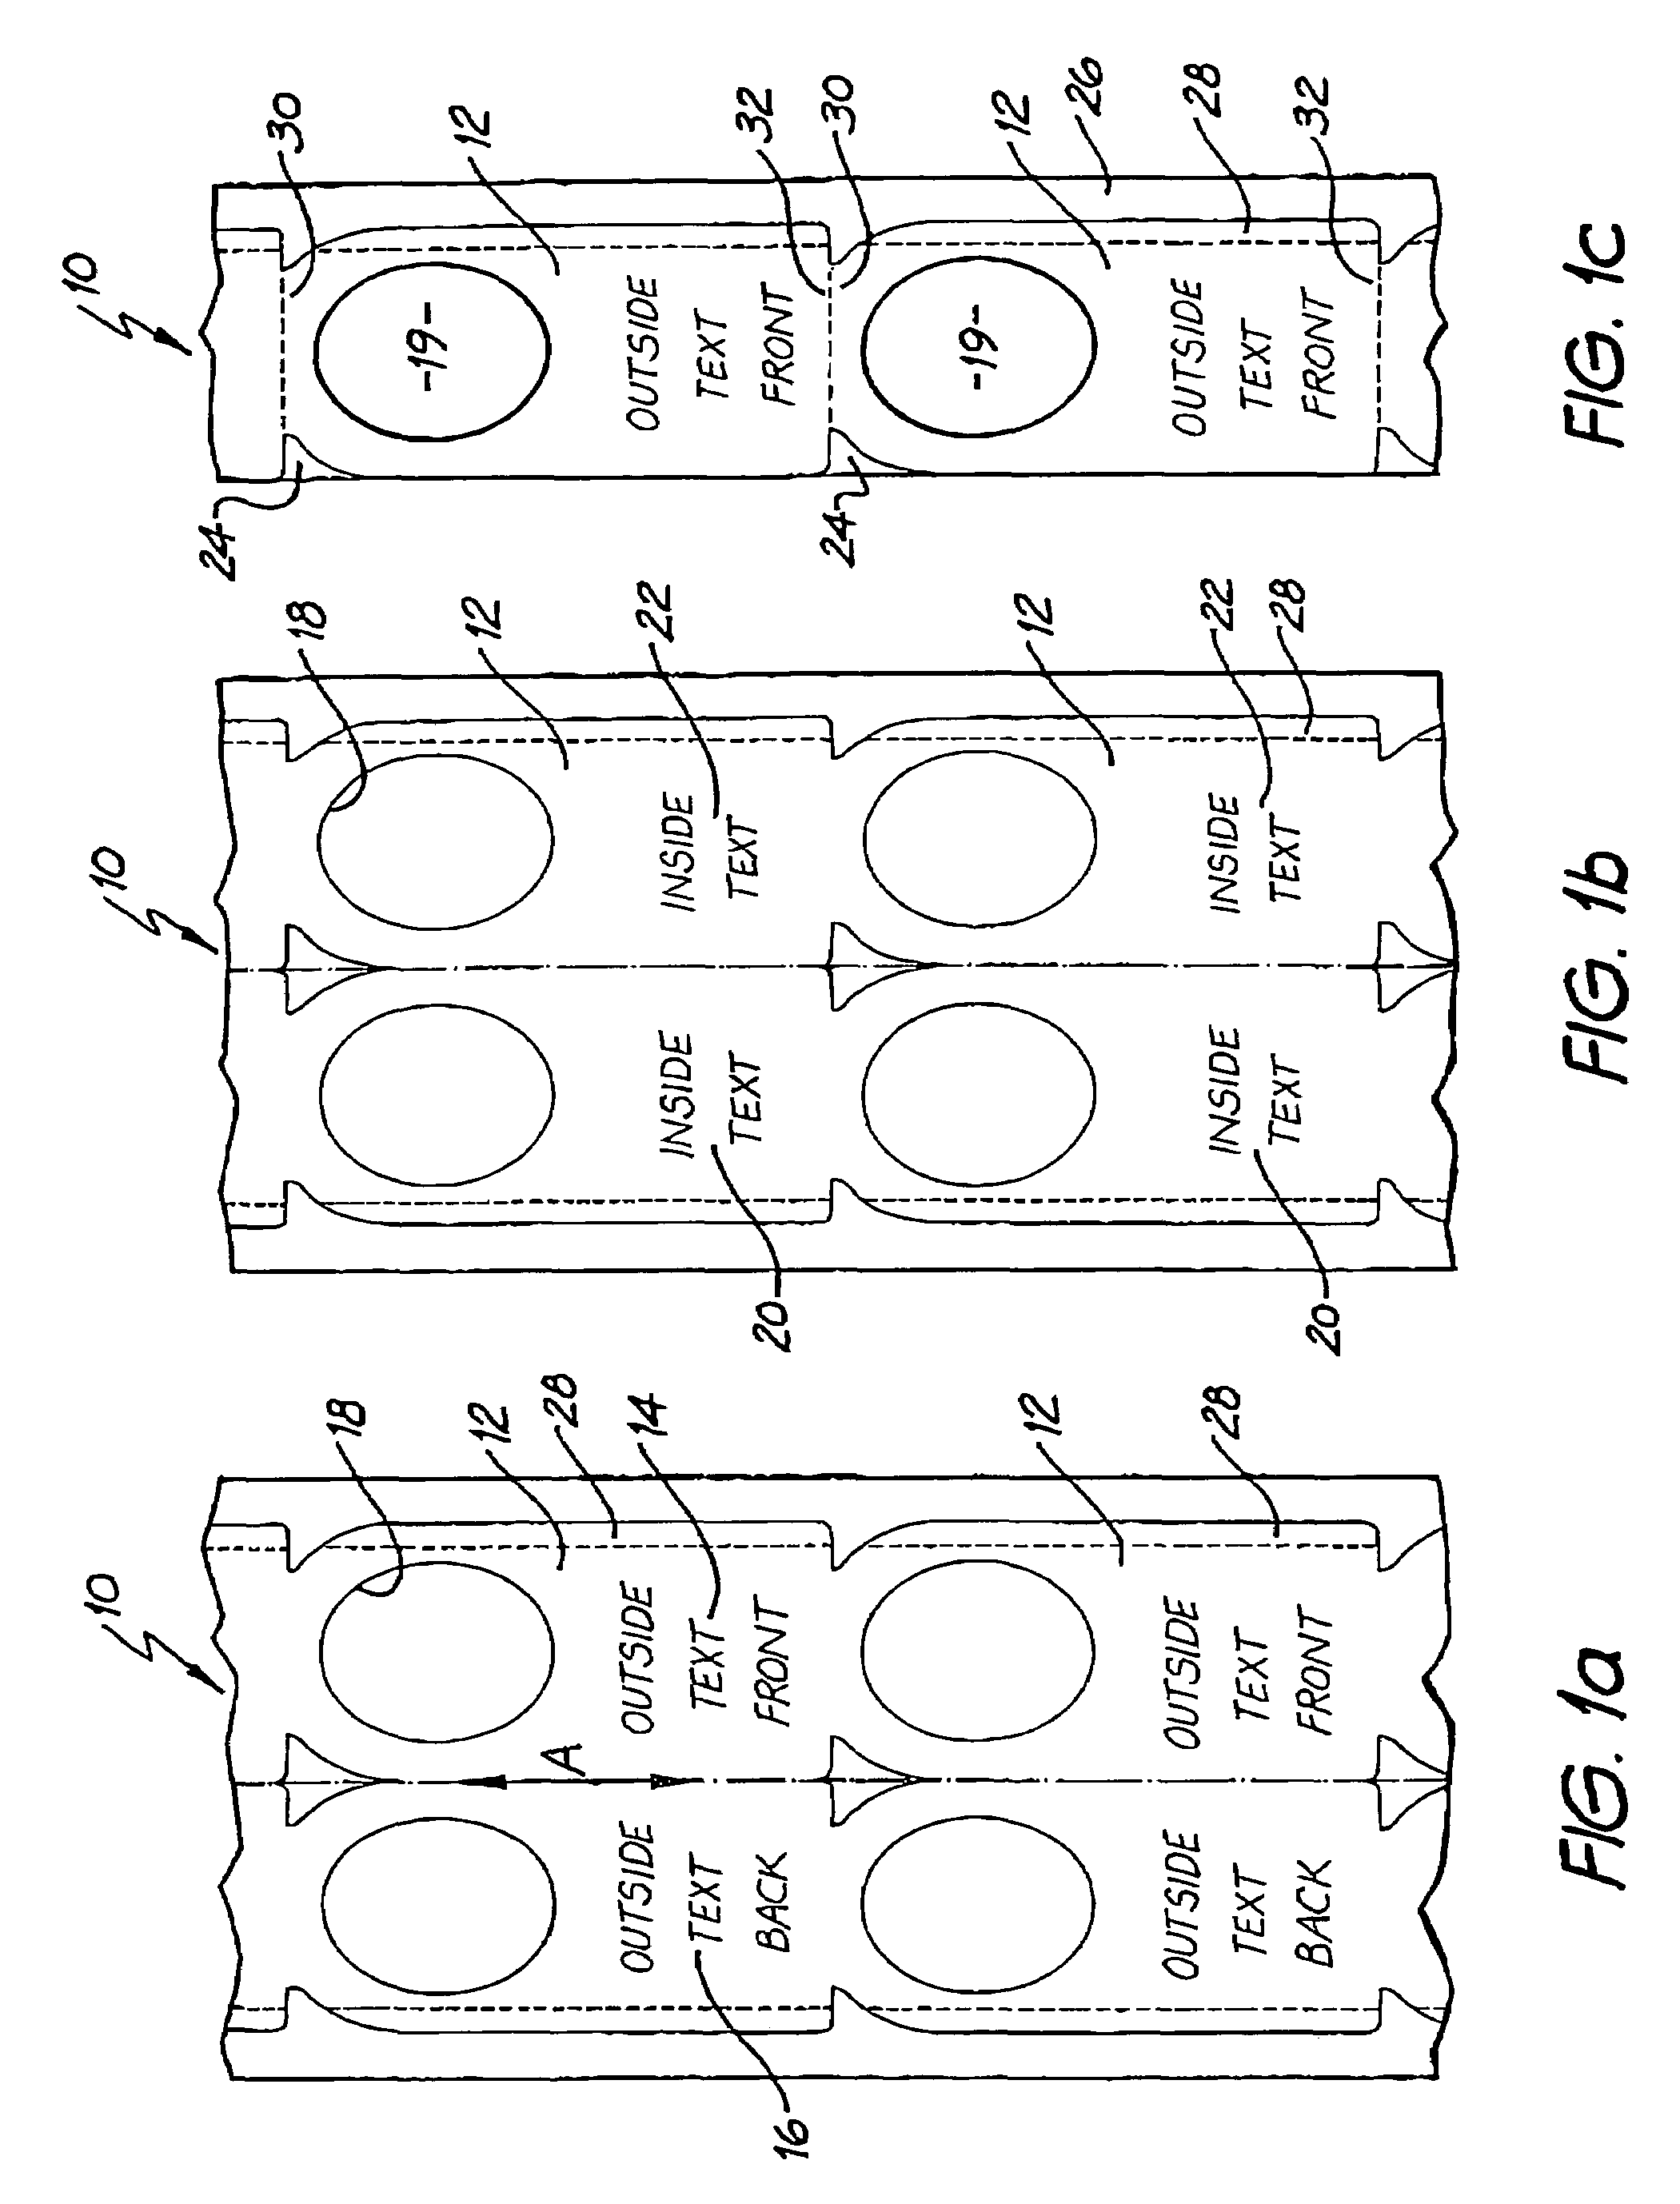 Methods and apparatus for producing and for applying labels